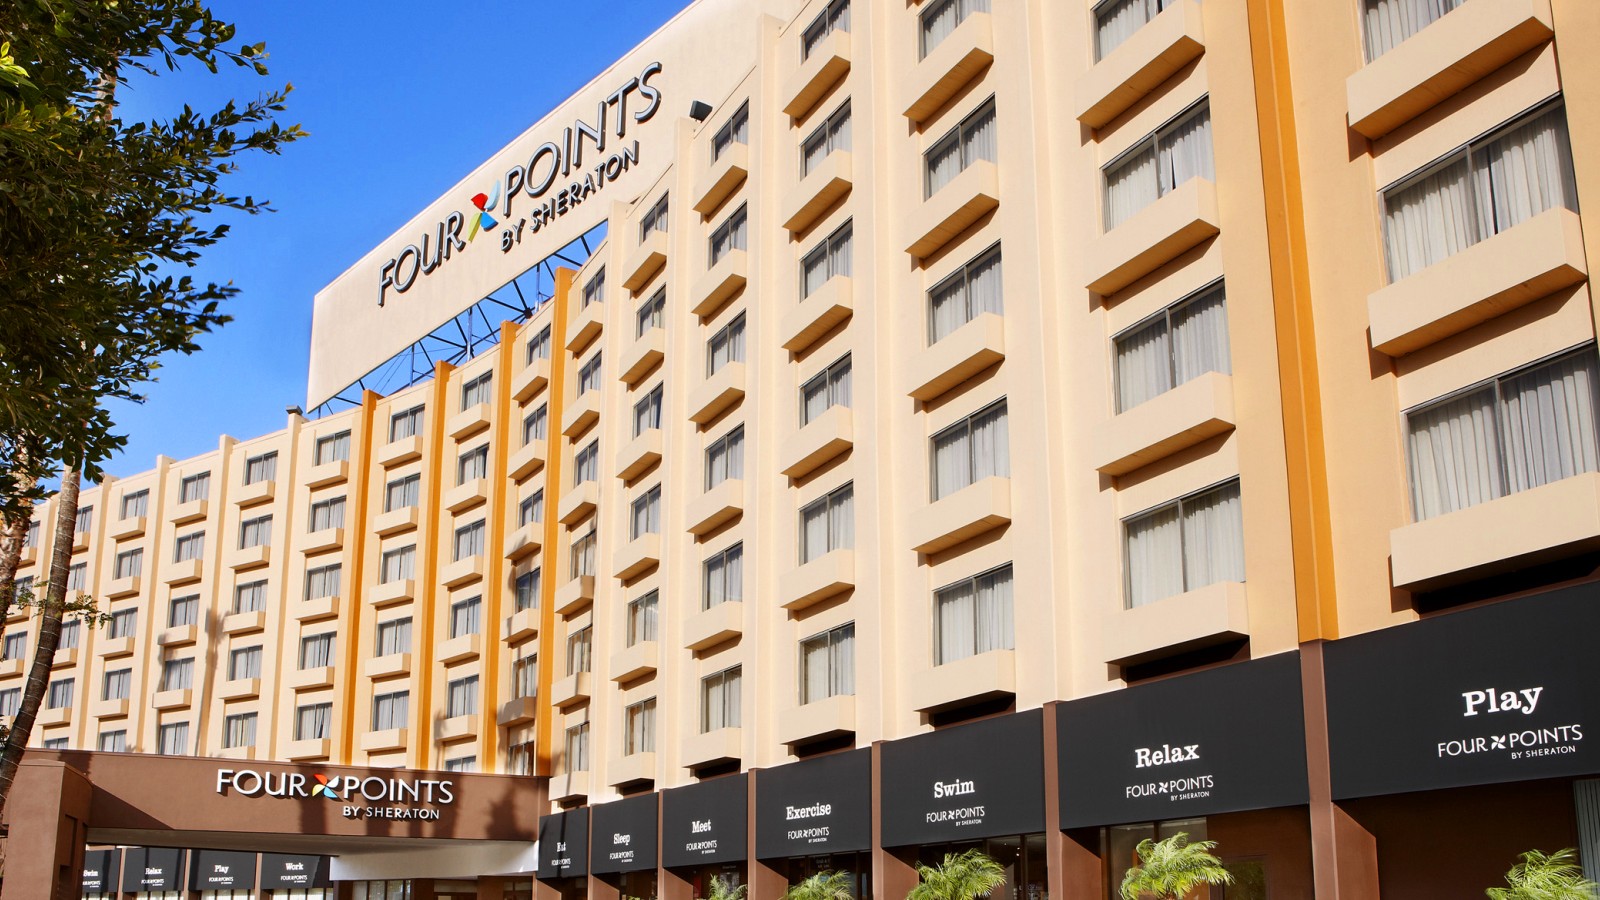 Exterior of the Four Points LAX (Image: Four Points by Sheraton)